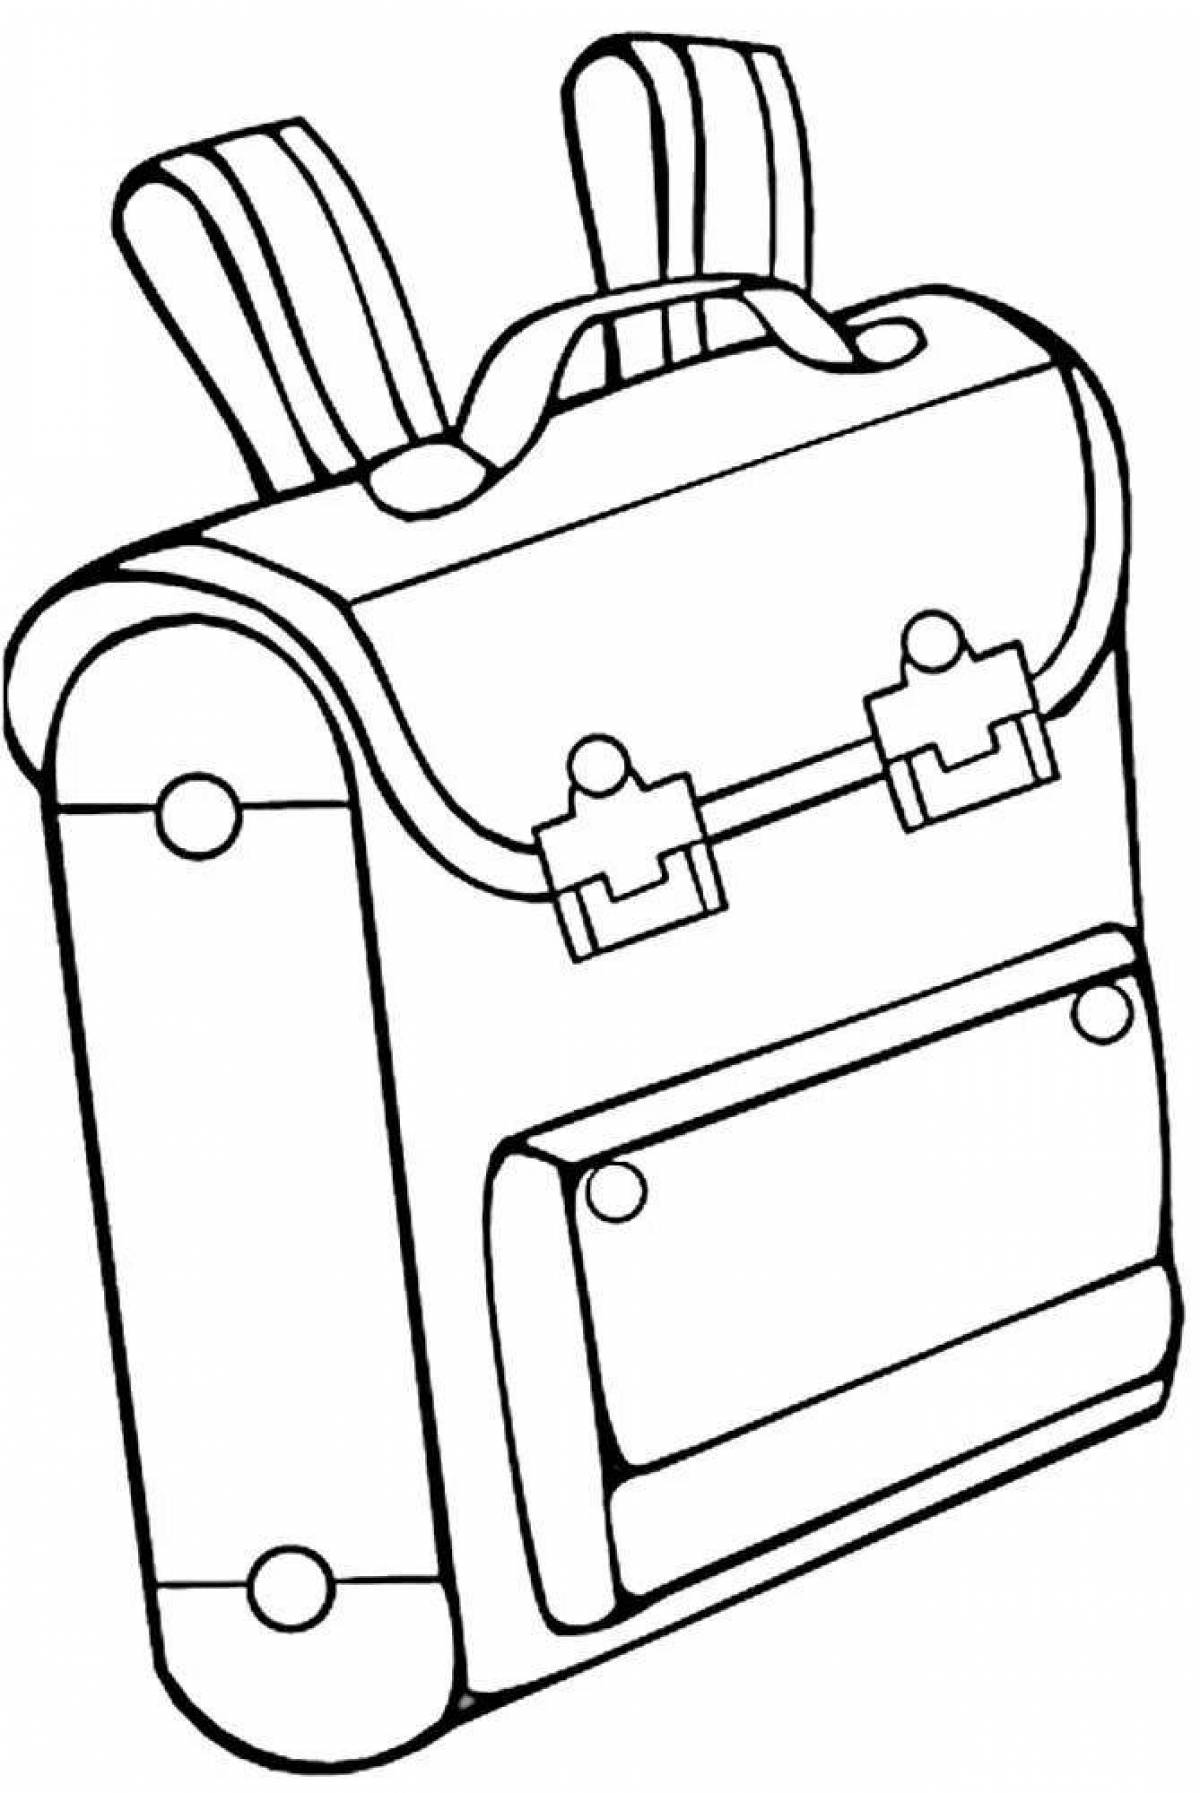 Attractive backpack coloring page